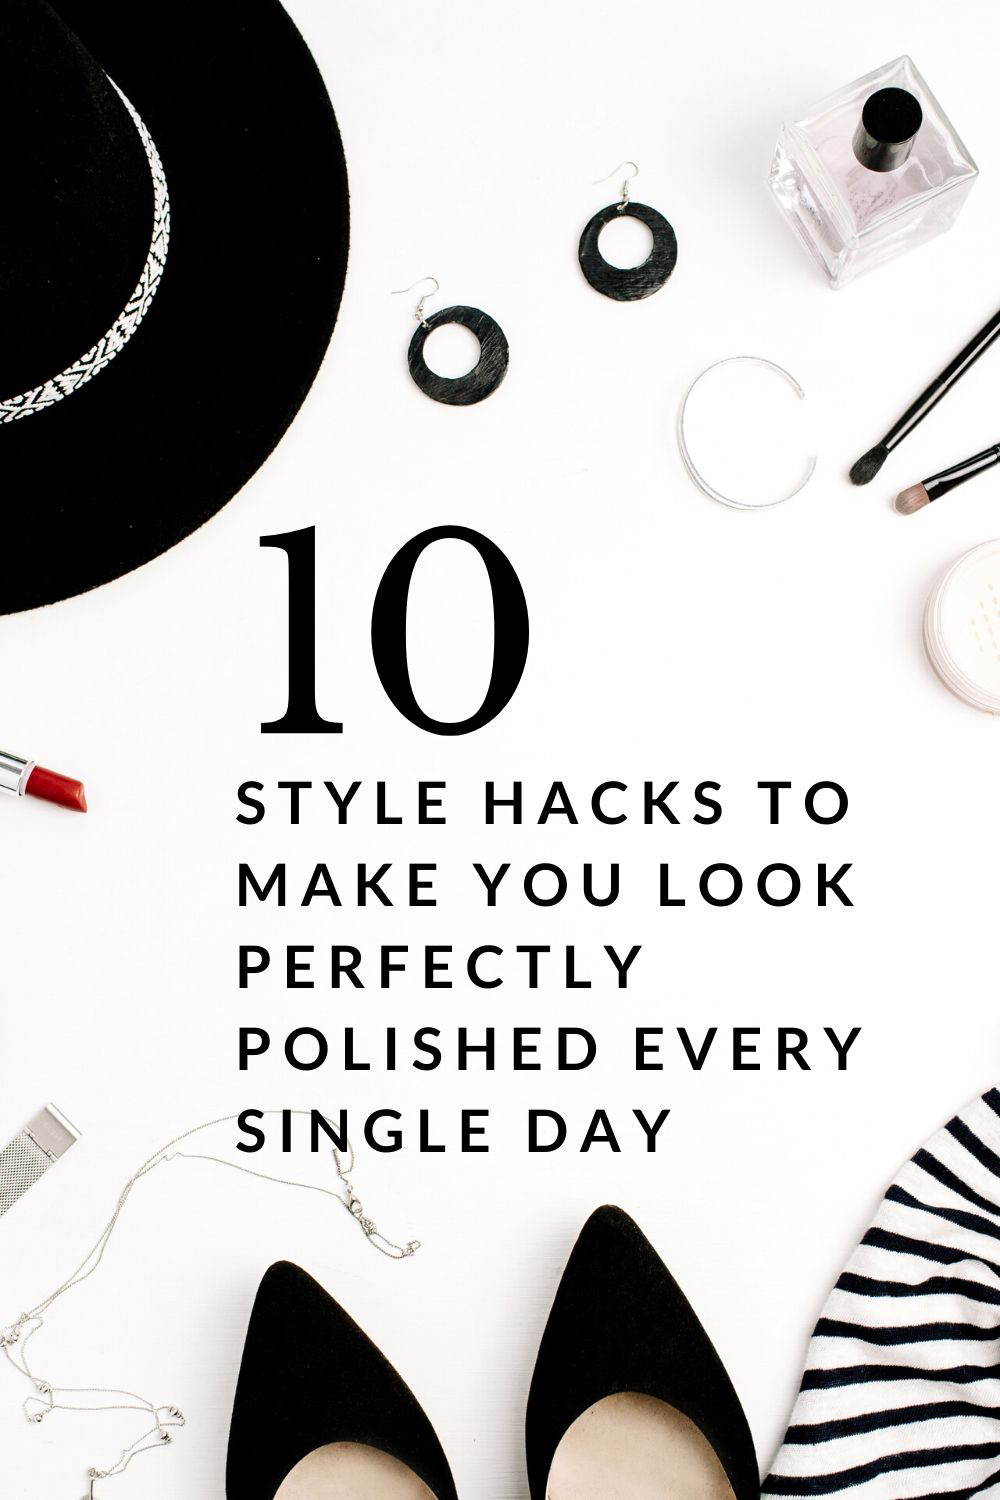 10 style hacks to make you look perfectly polished every single day